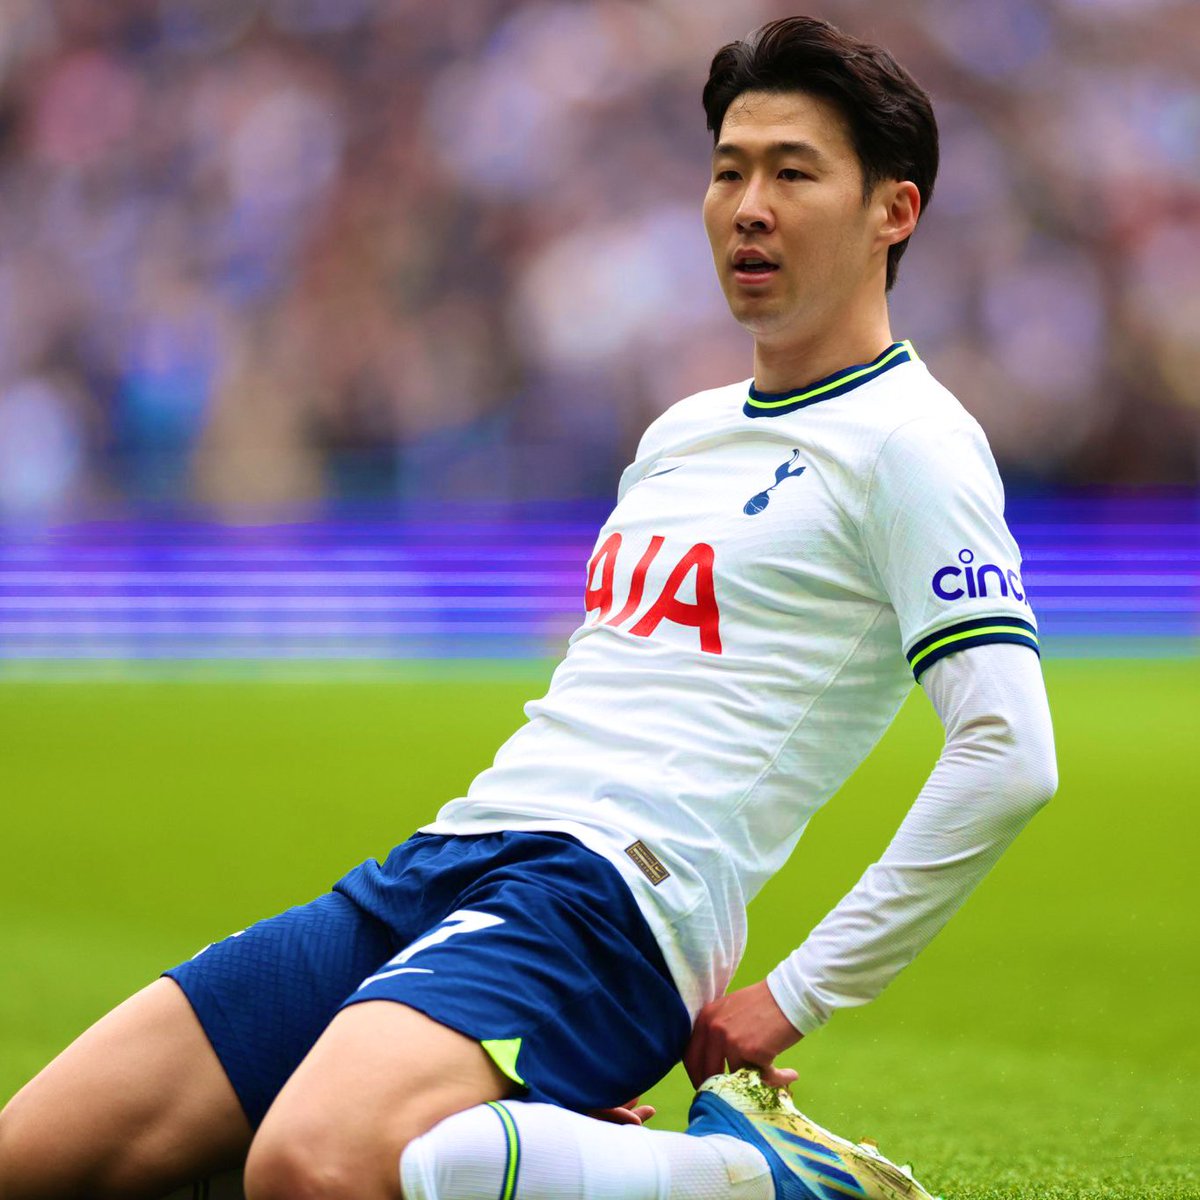 🚨 Saudi Arabia plan to make an offer to Heung-min Son to join their league in 2024! 🇸🇦🇰🇷

Steps have already been taken.

(Source: @JacobsBen )